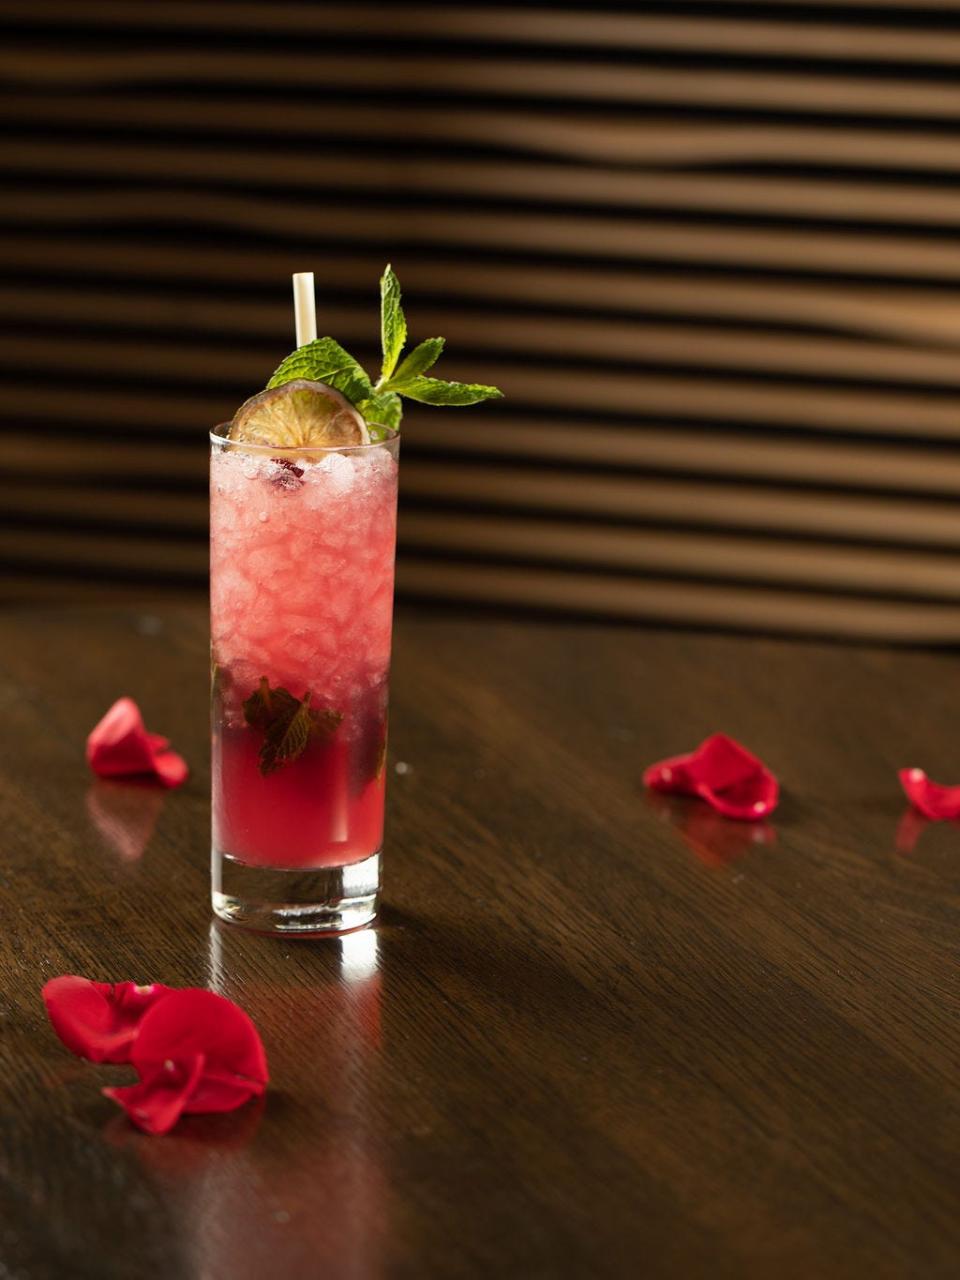 There will also be several specialty Valentine’s Day cocktails at The Seagate including the Aphrodite featuring Bacardi Silver Rum, cranberry cordial, mint, lime, and candied cranberries.